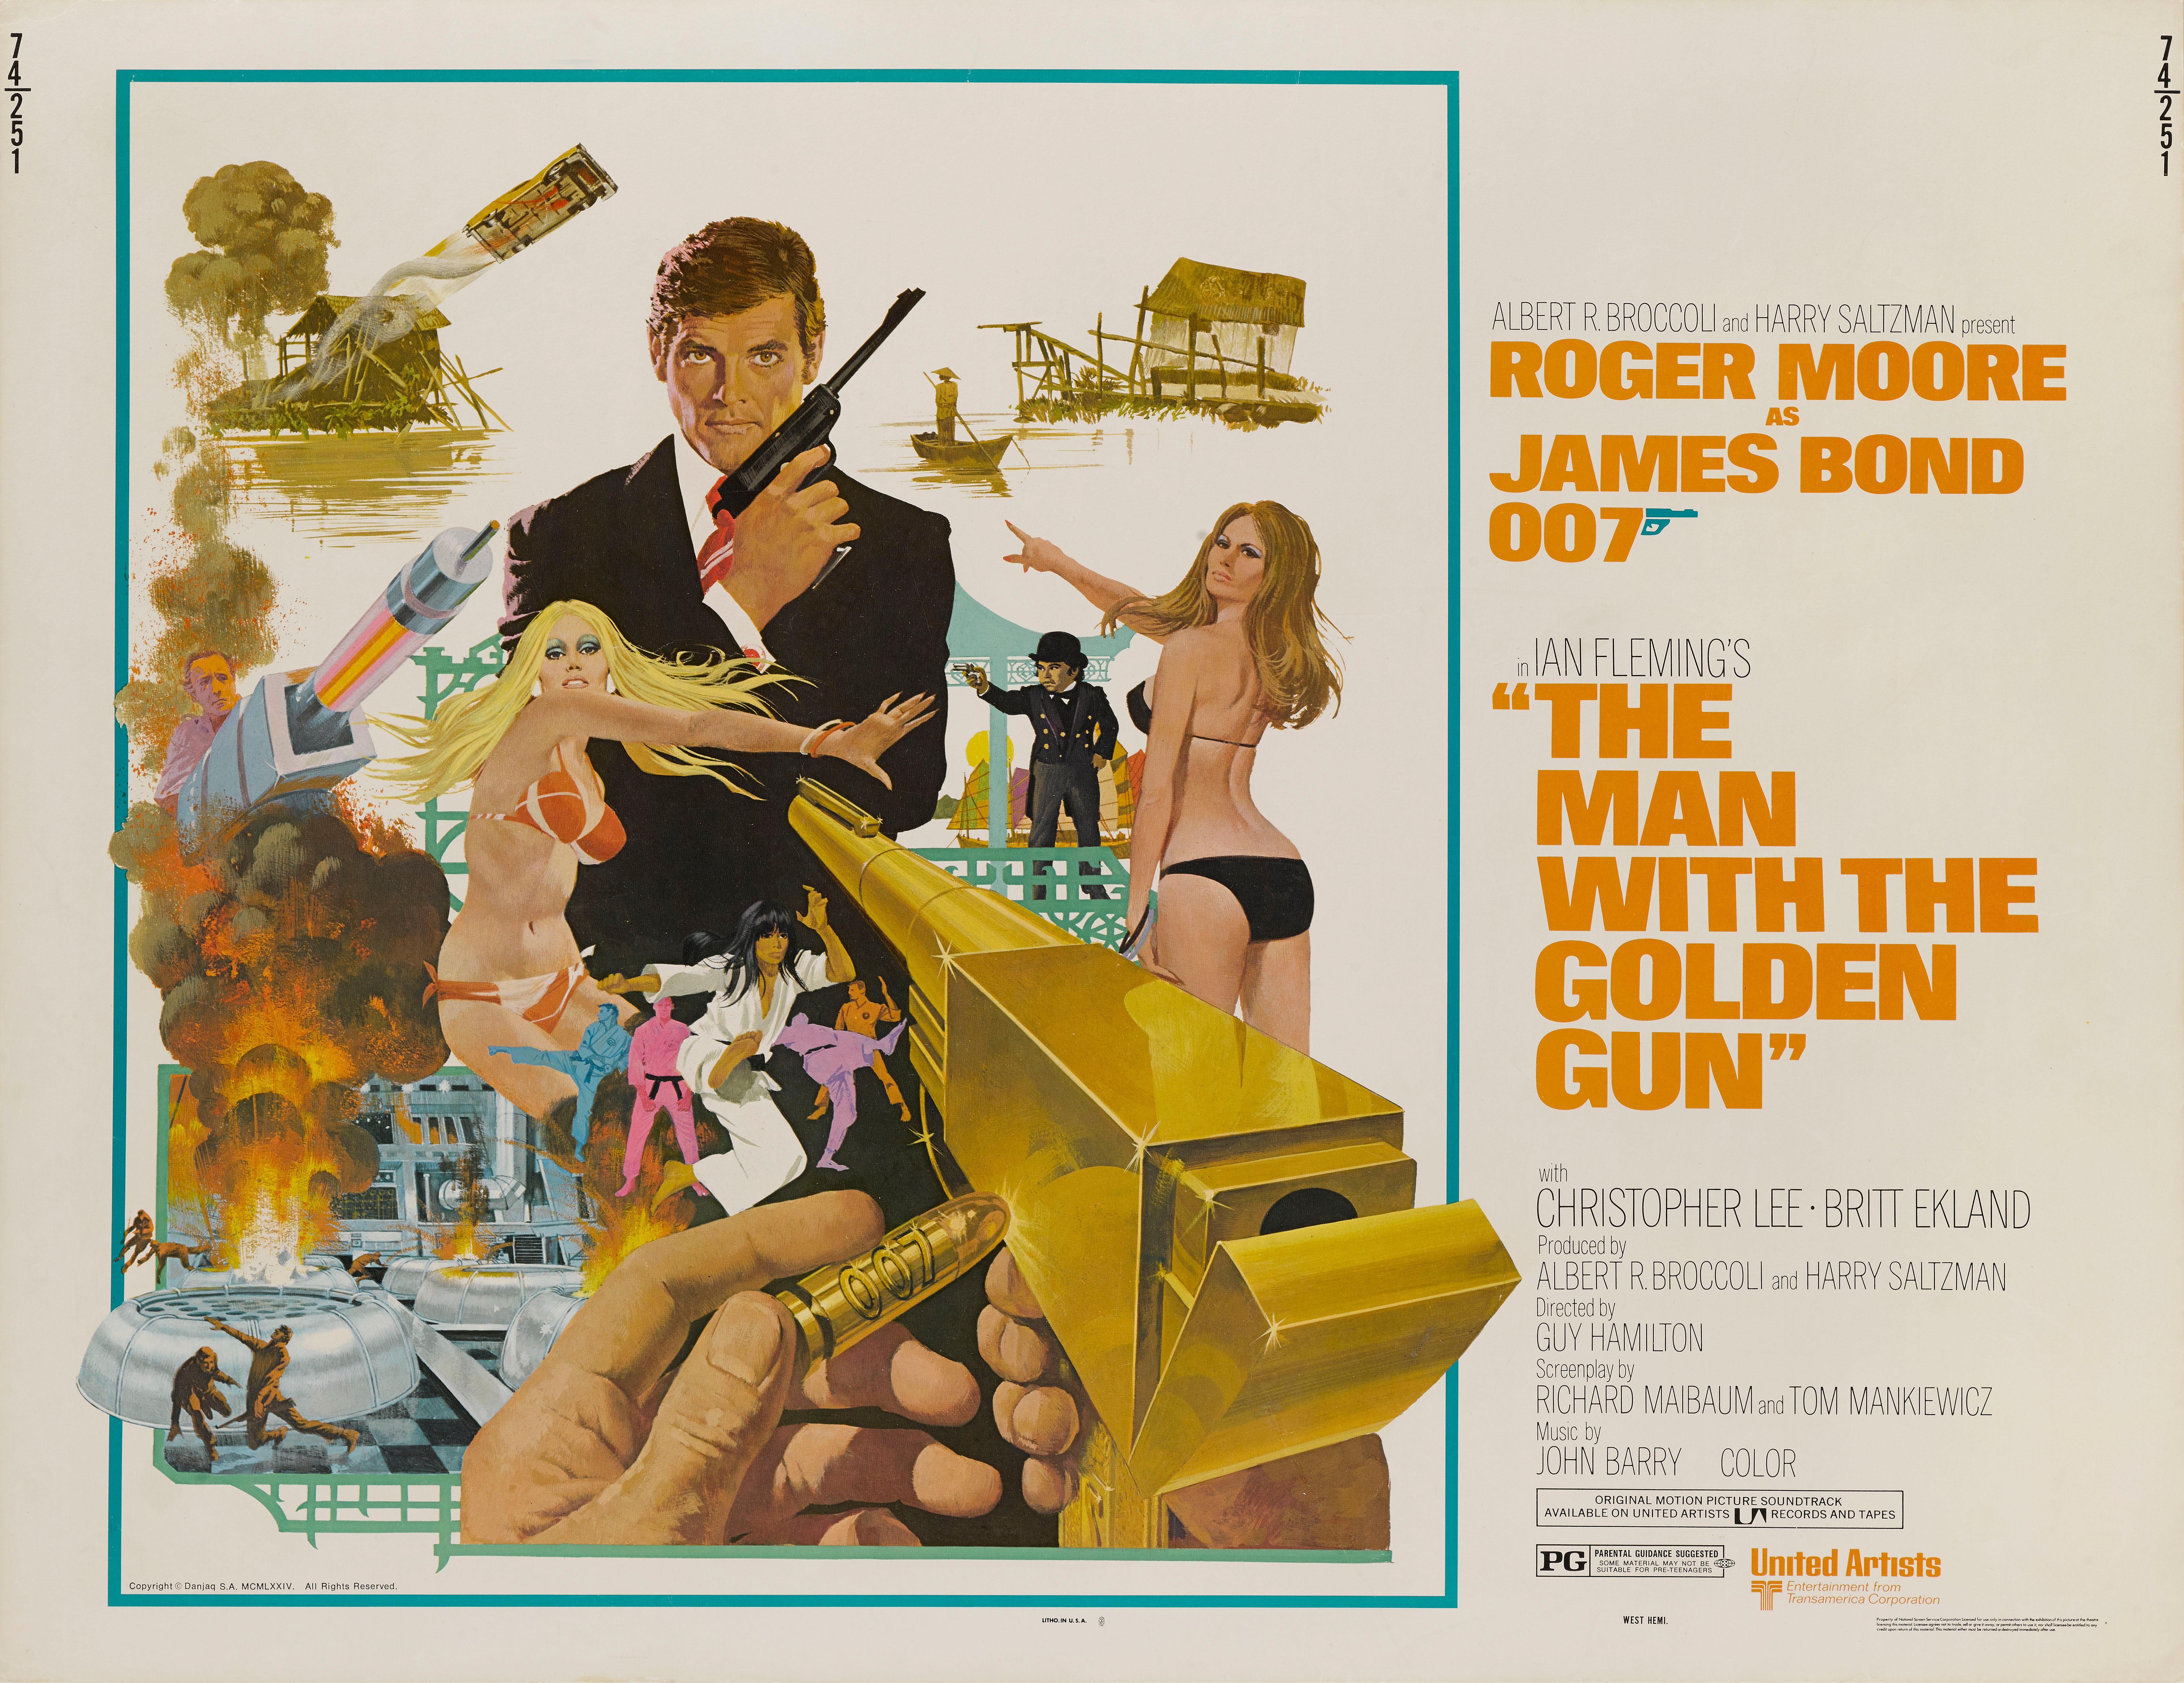 Original US film poster for the 1974 James Bond film staring Roger Moore.
This was Moors second roll as 007. This film was directed by Guy Hamilton.
The artwork on this poster is by Robert E. McGinnis (b.1926)
This poster is unfolded in near mint